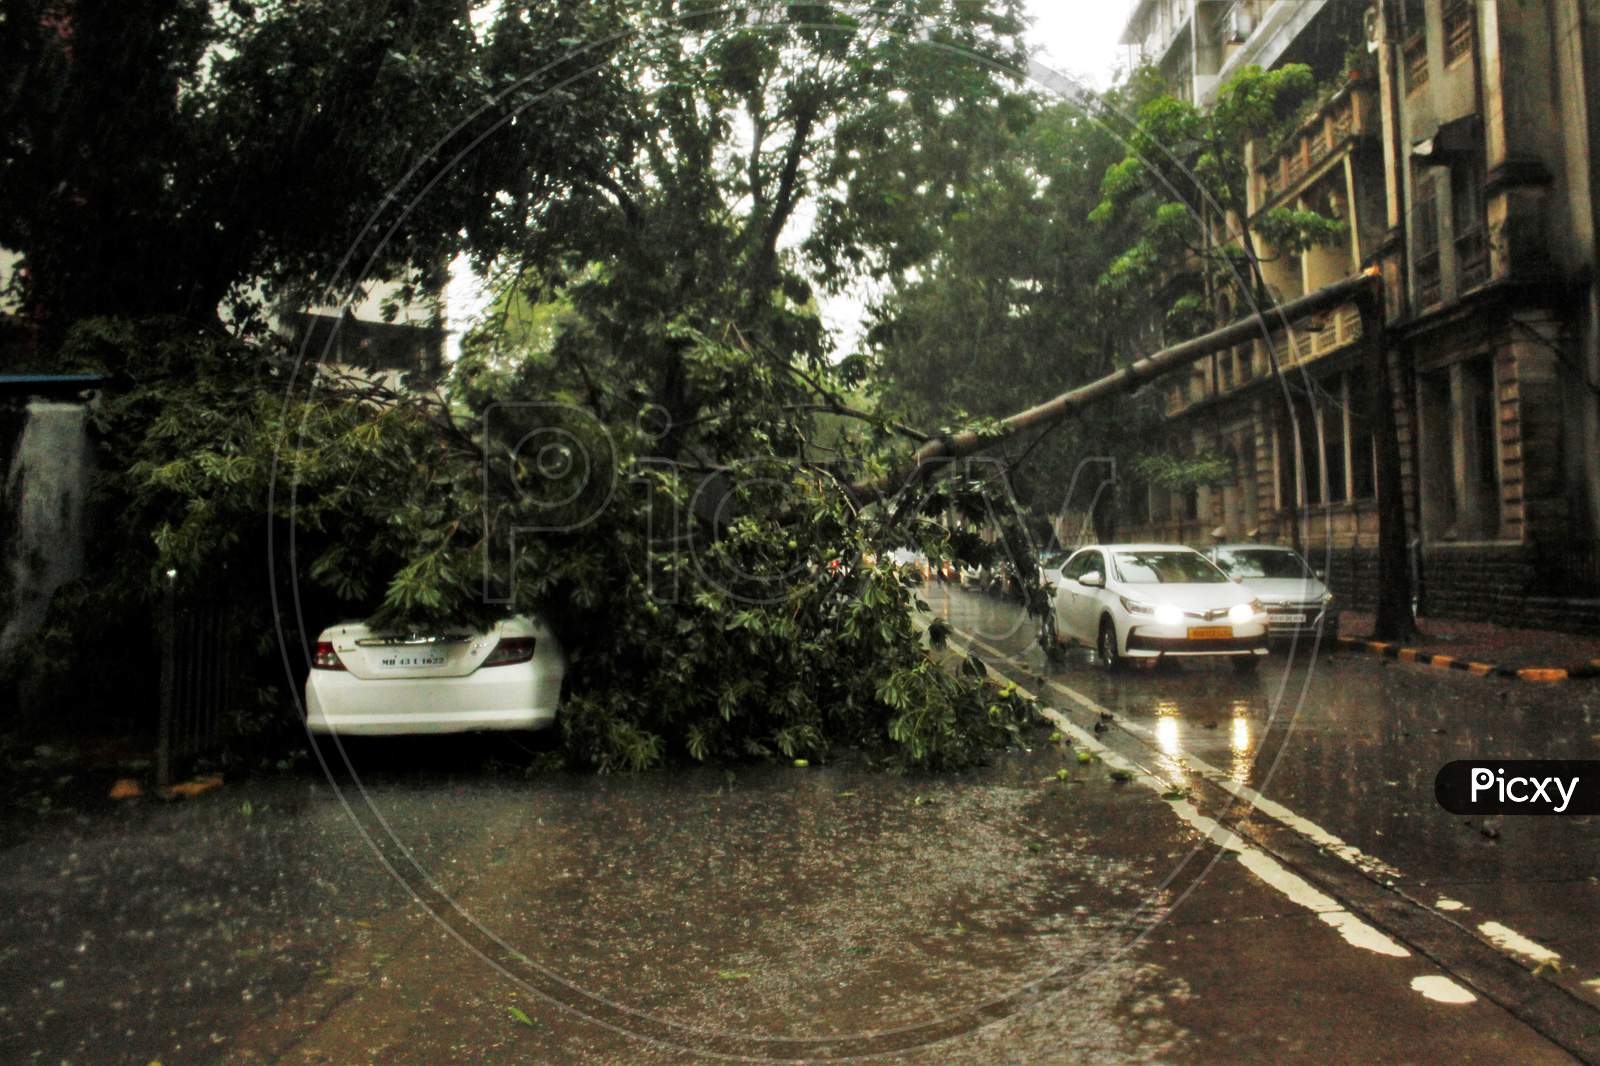 A car drives past a tree that fell on a car during heavy rains, in Mumbai, India on July 7, 2020.